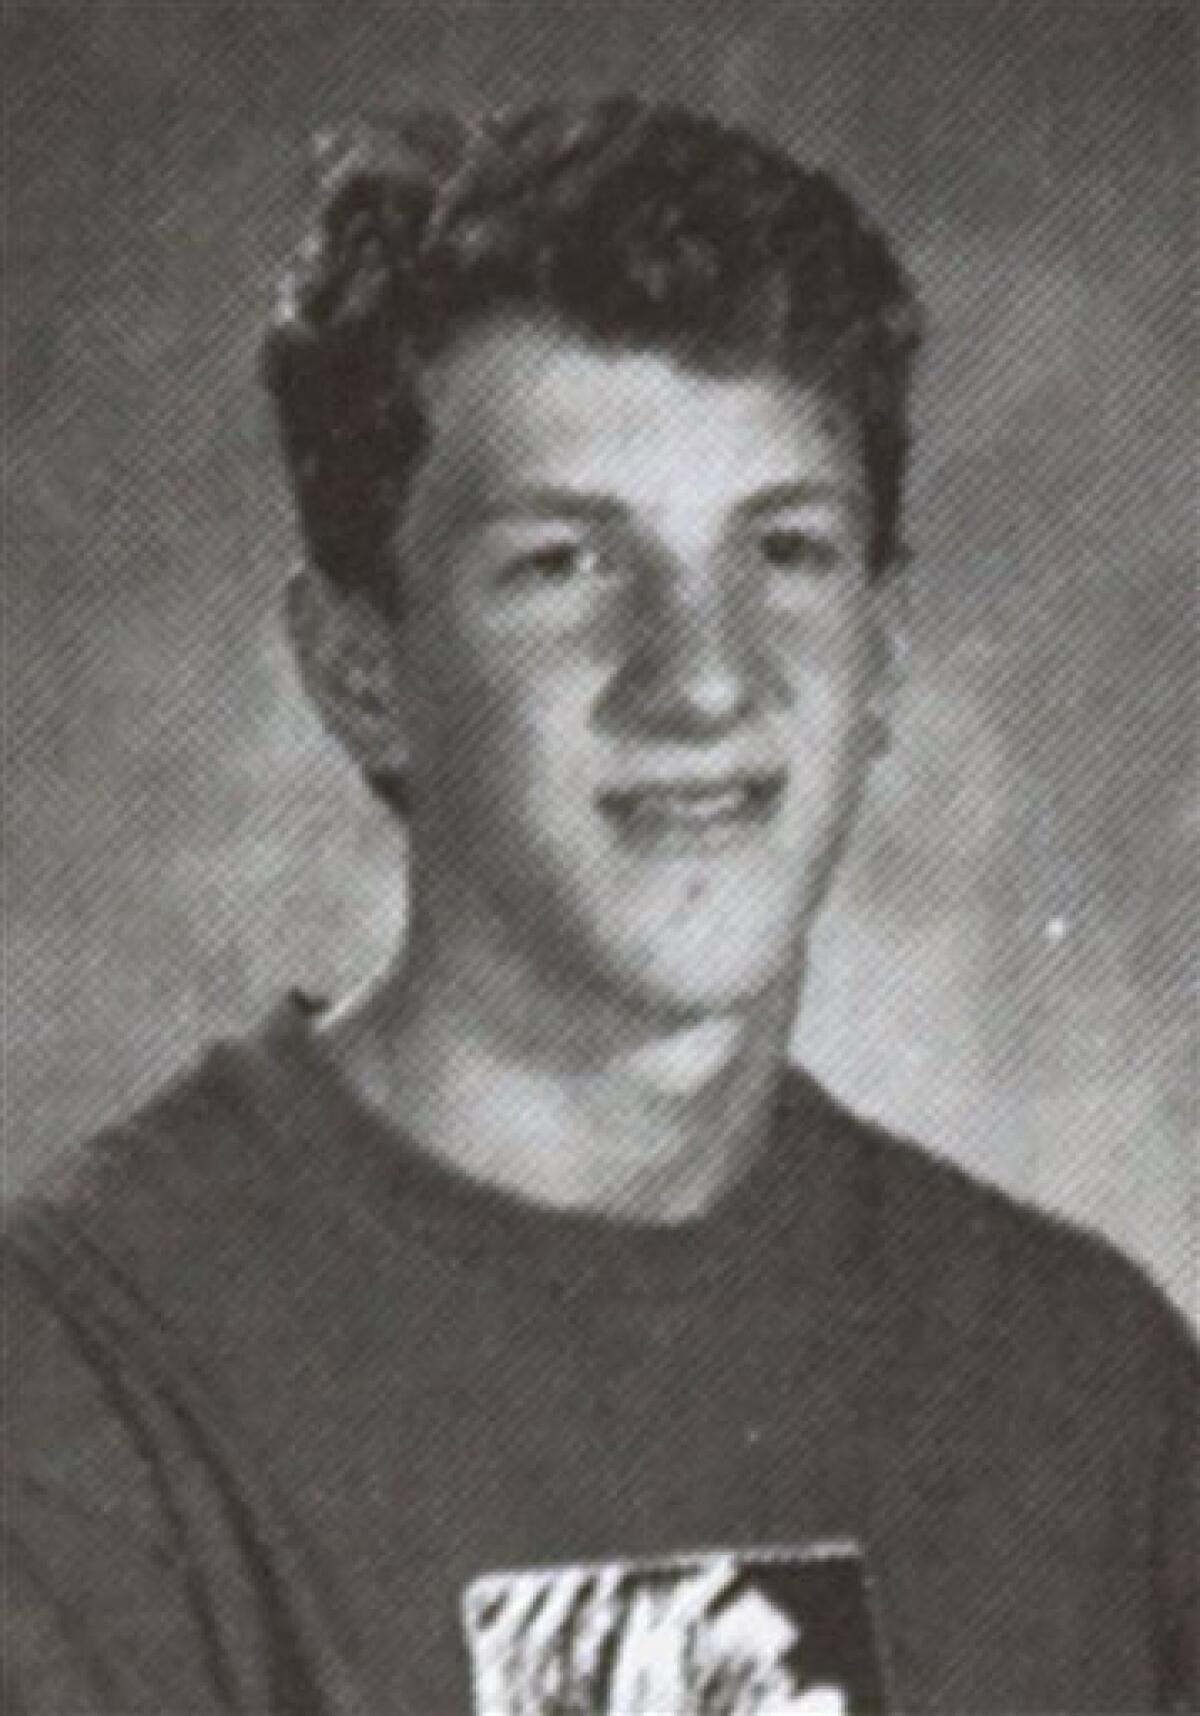 FILE -This 1998 file yearbook photo from Columbine High School in Littleton, Colo. shows Dylan Klebold. The mother of the Columbine killer says she has been studying suicide in the decade since the high school massacre but had no idea her son was suicidal until she read his journals after his death. Susan Klebold's essay in next month's issue of O, The Oprah Magazine, is the most detailed response yet from any of the parents of Columbine killers Dylan Klebold or Eric Harris. (AP Photo/File)